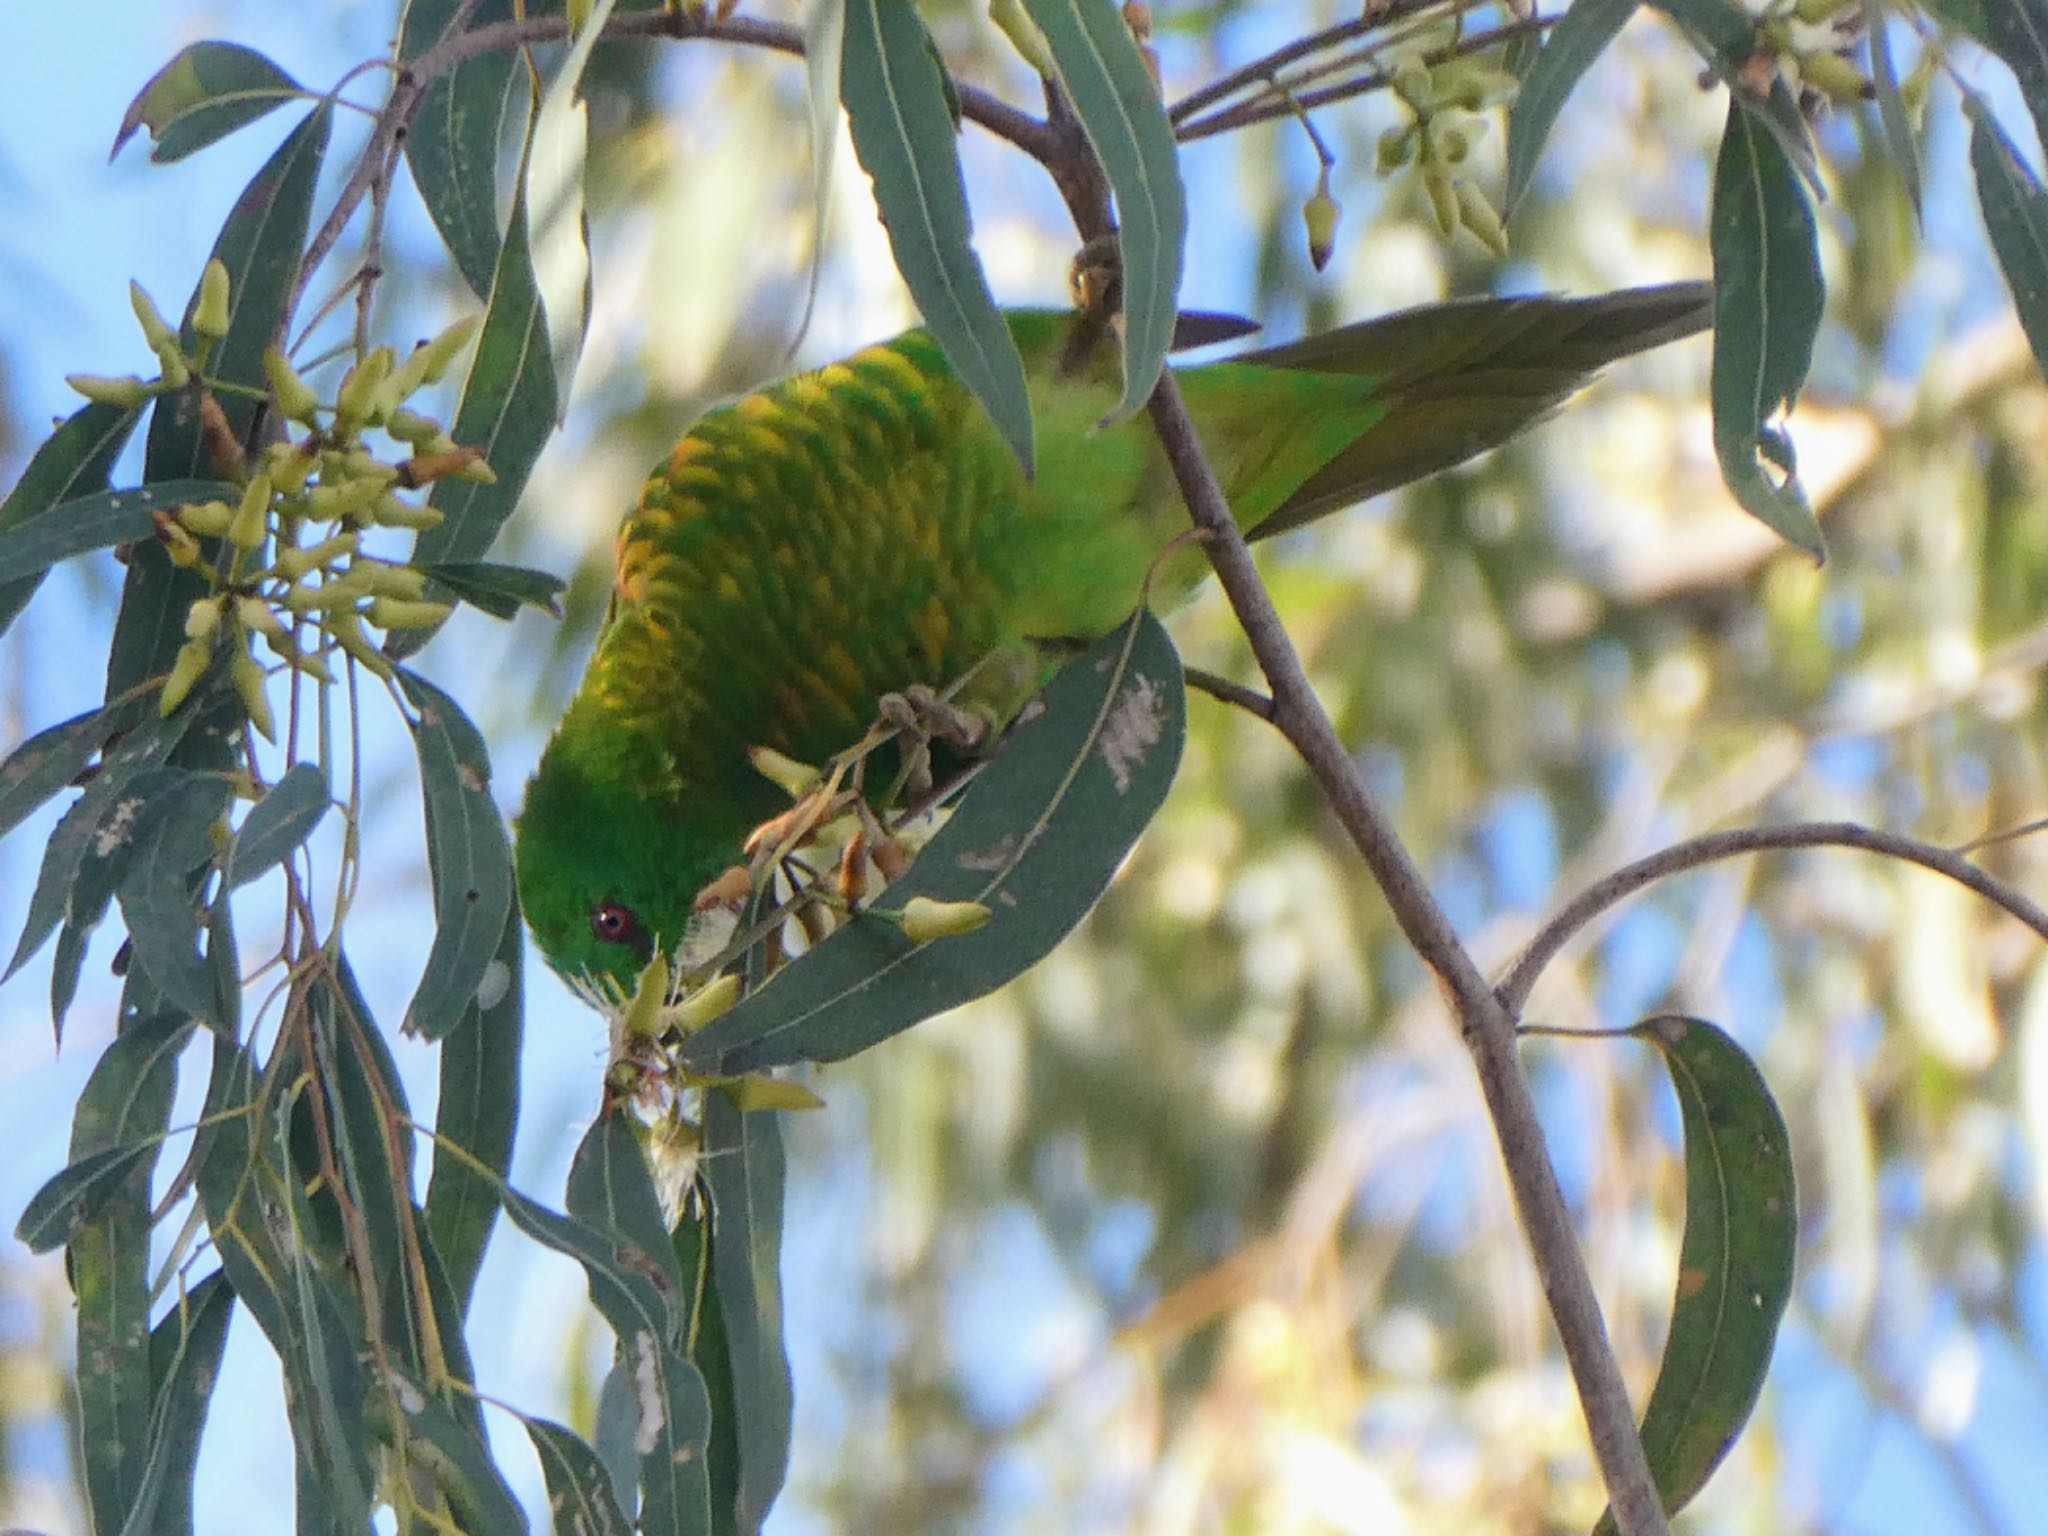 Photo of Scaly-breasted Lorikeet at Southport, QLD, Australia by Maki